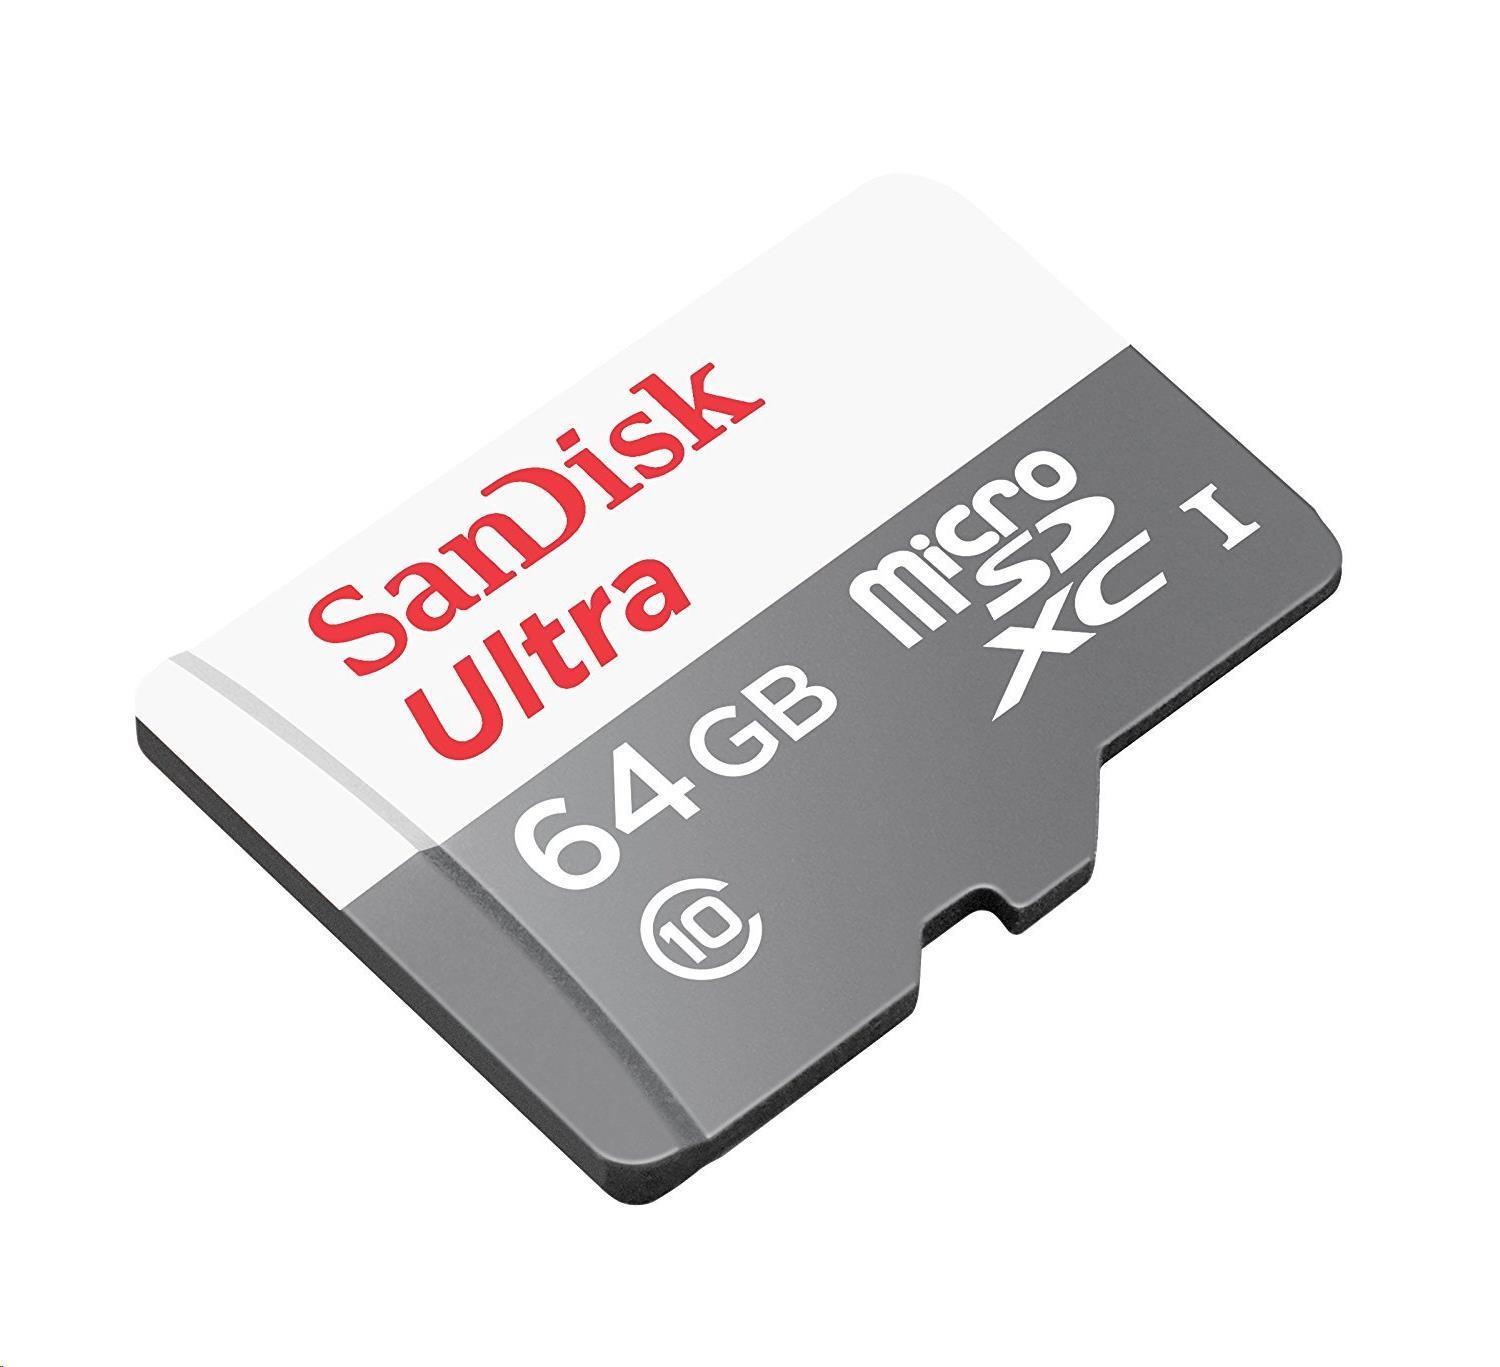 Sandisk MicroSDXC 64GB Ultra (80 MB/ s,  Class 10 UHS-I,  Android)0 